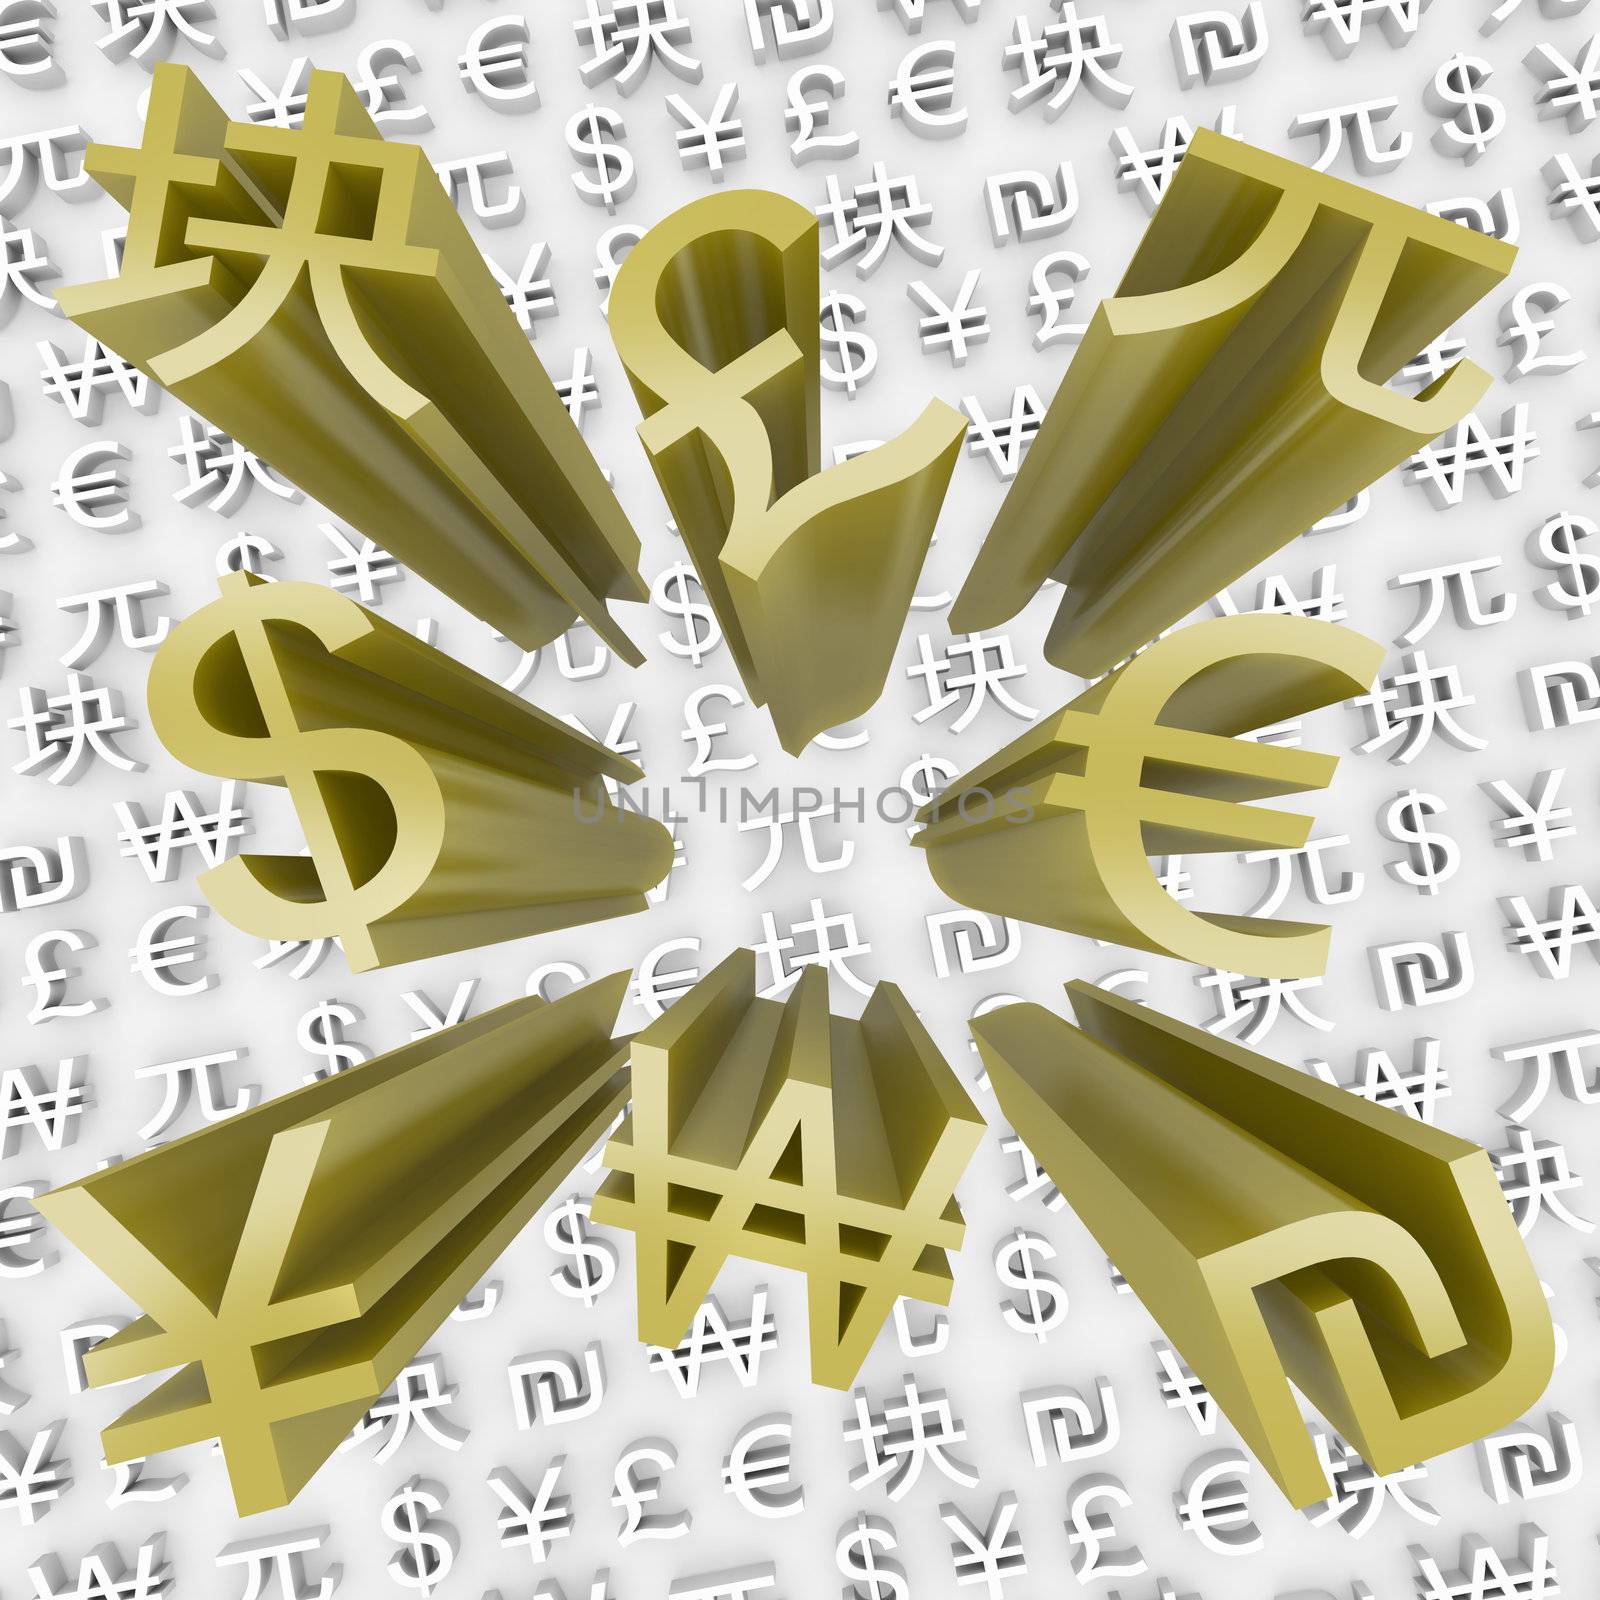 Gold Currency Symbols Fly Out of Money Background by iQoncept